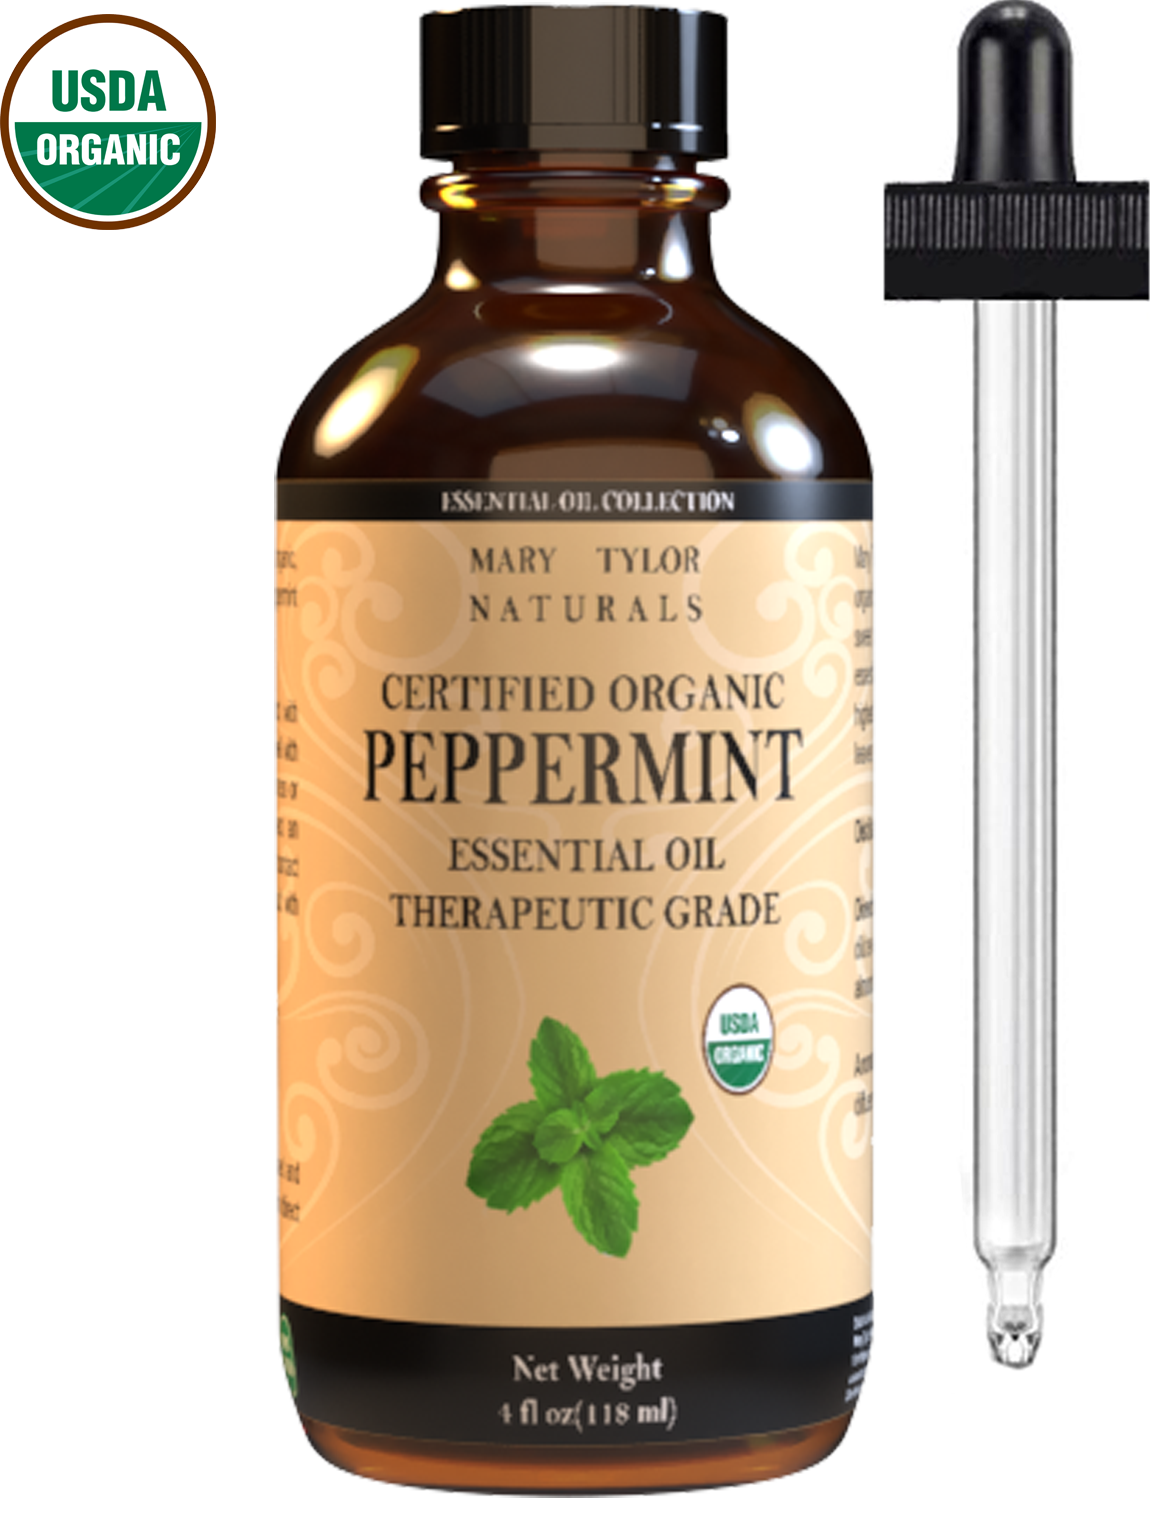 Peppermint Essential Oil Benefits And Uses Mary Tylor Naturals 3384